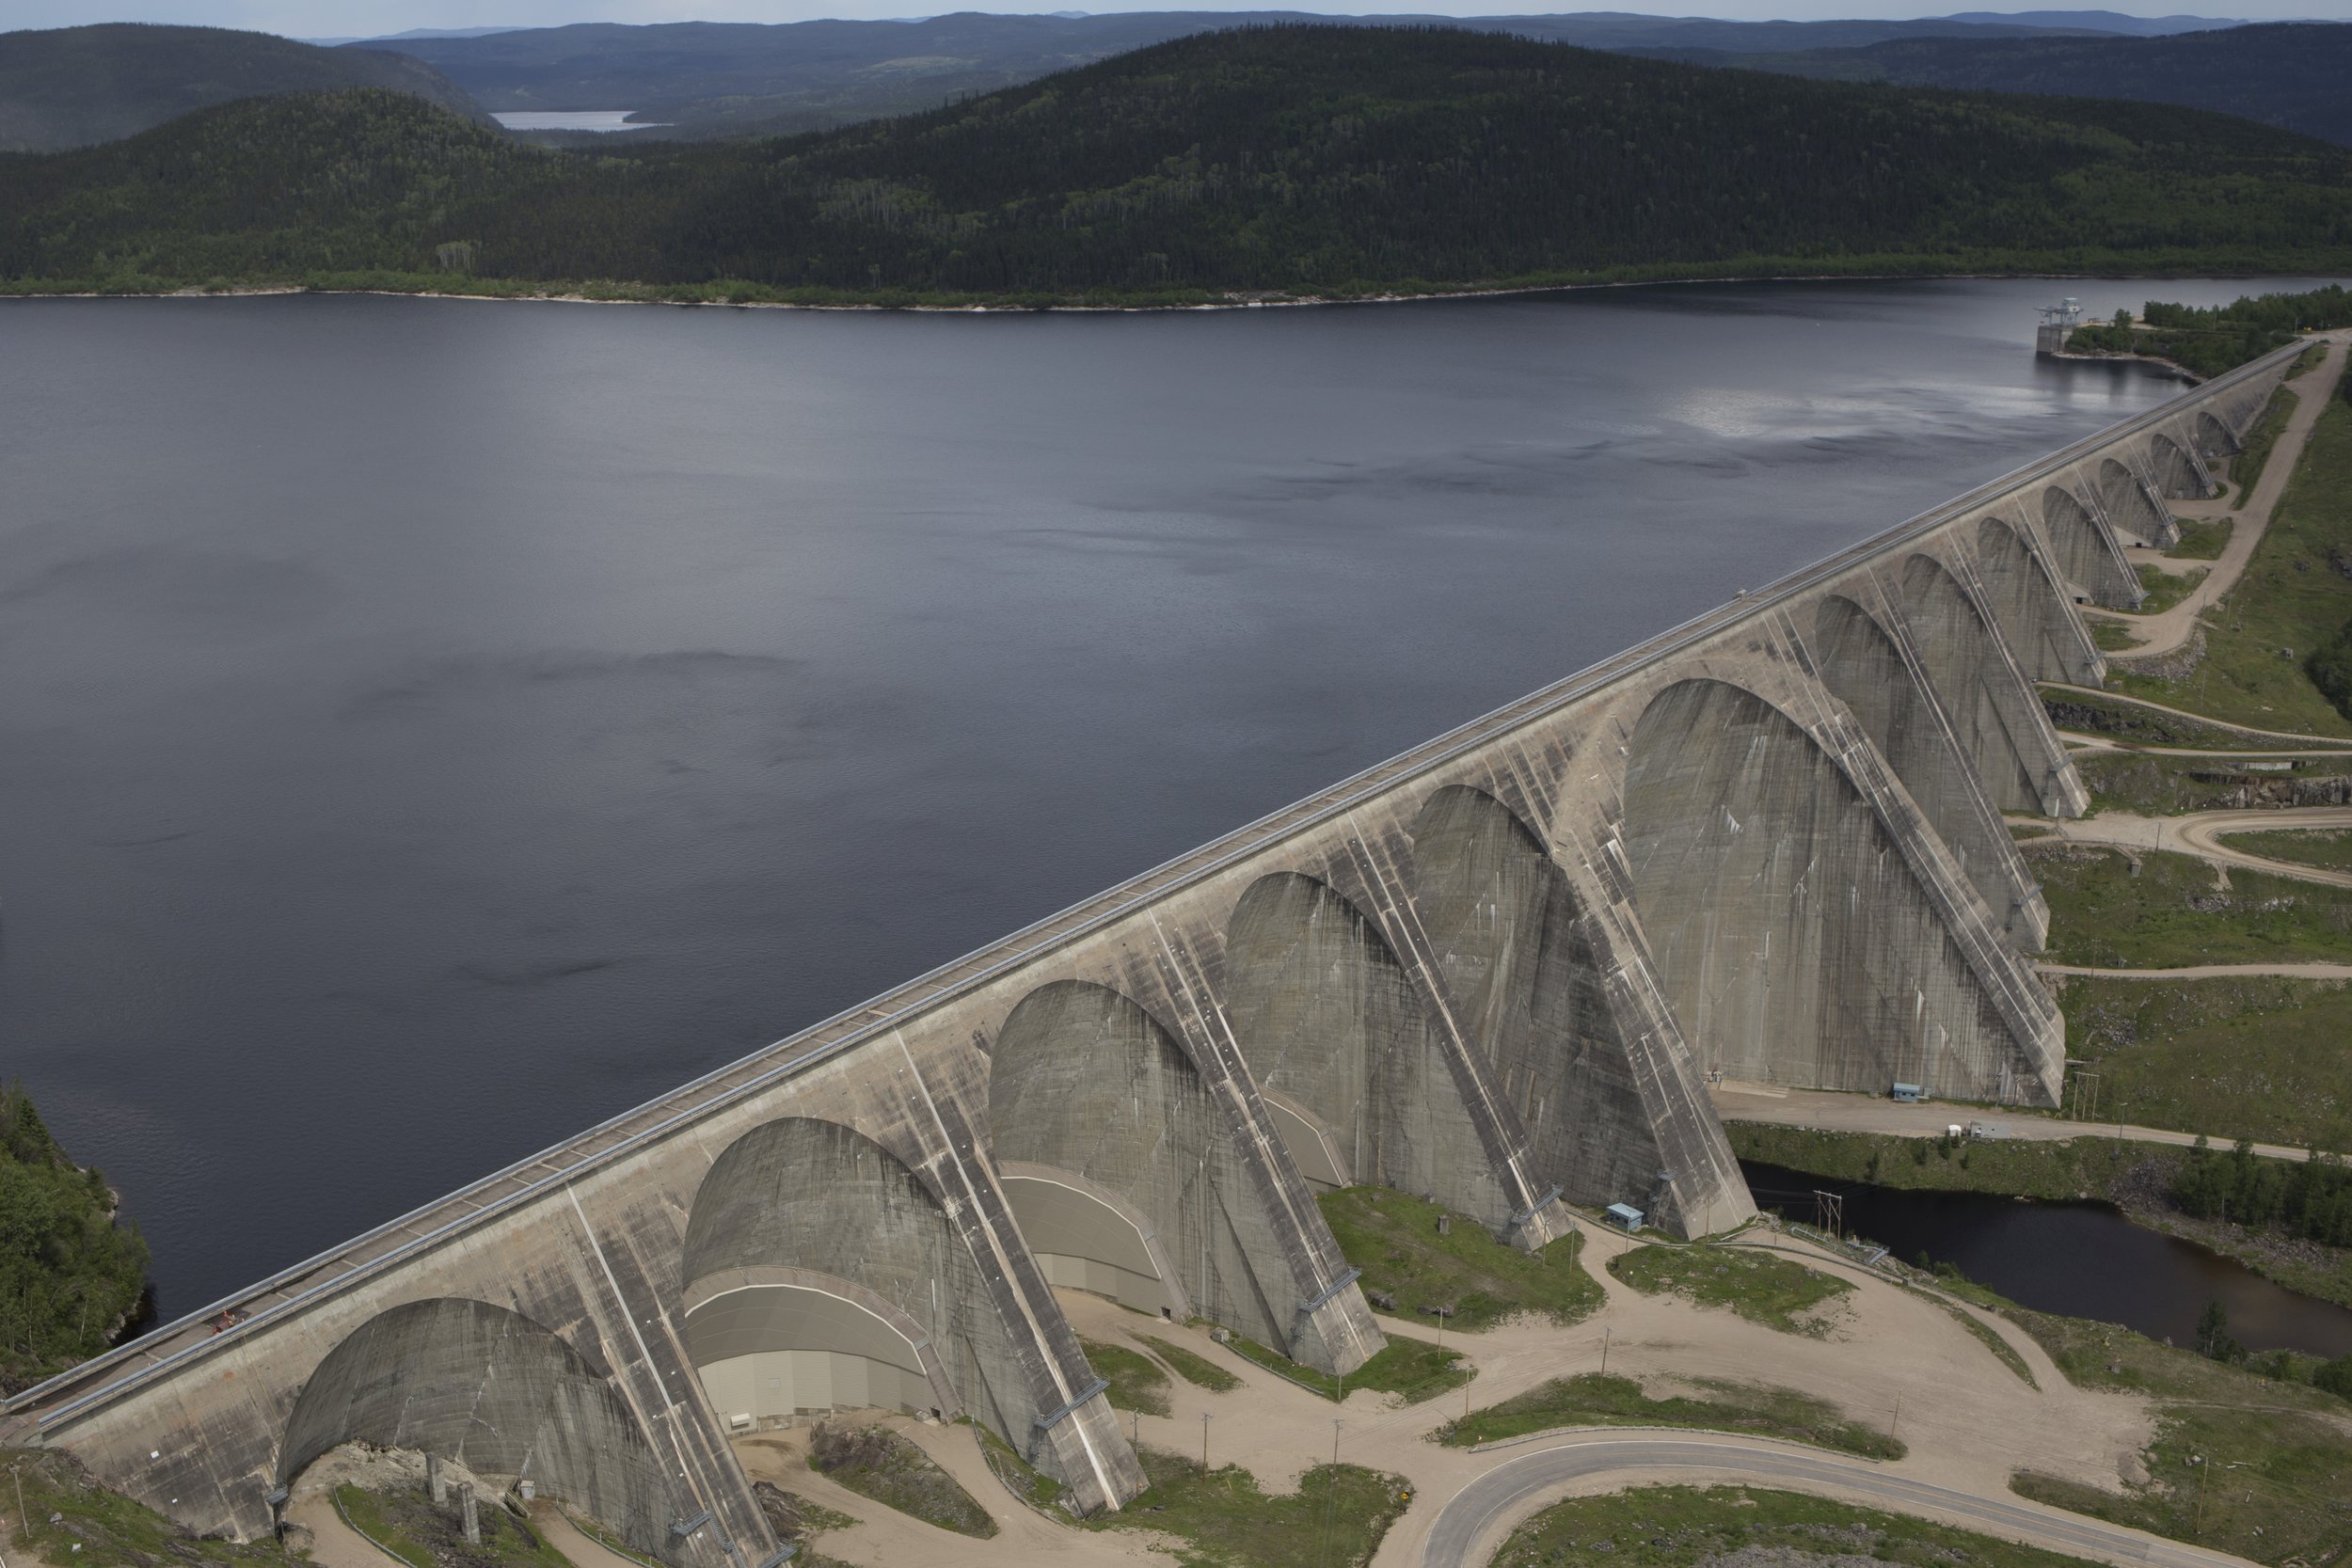 The Daniel-Johnson Dam, otherwise known as the Manic-5, on the Manicouagan River